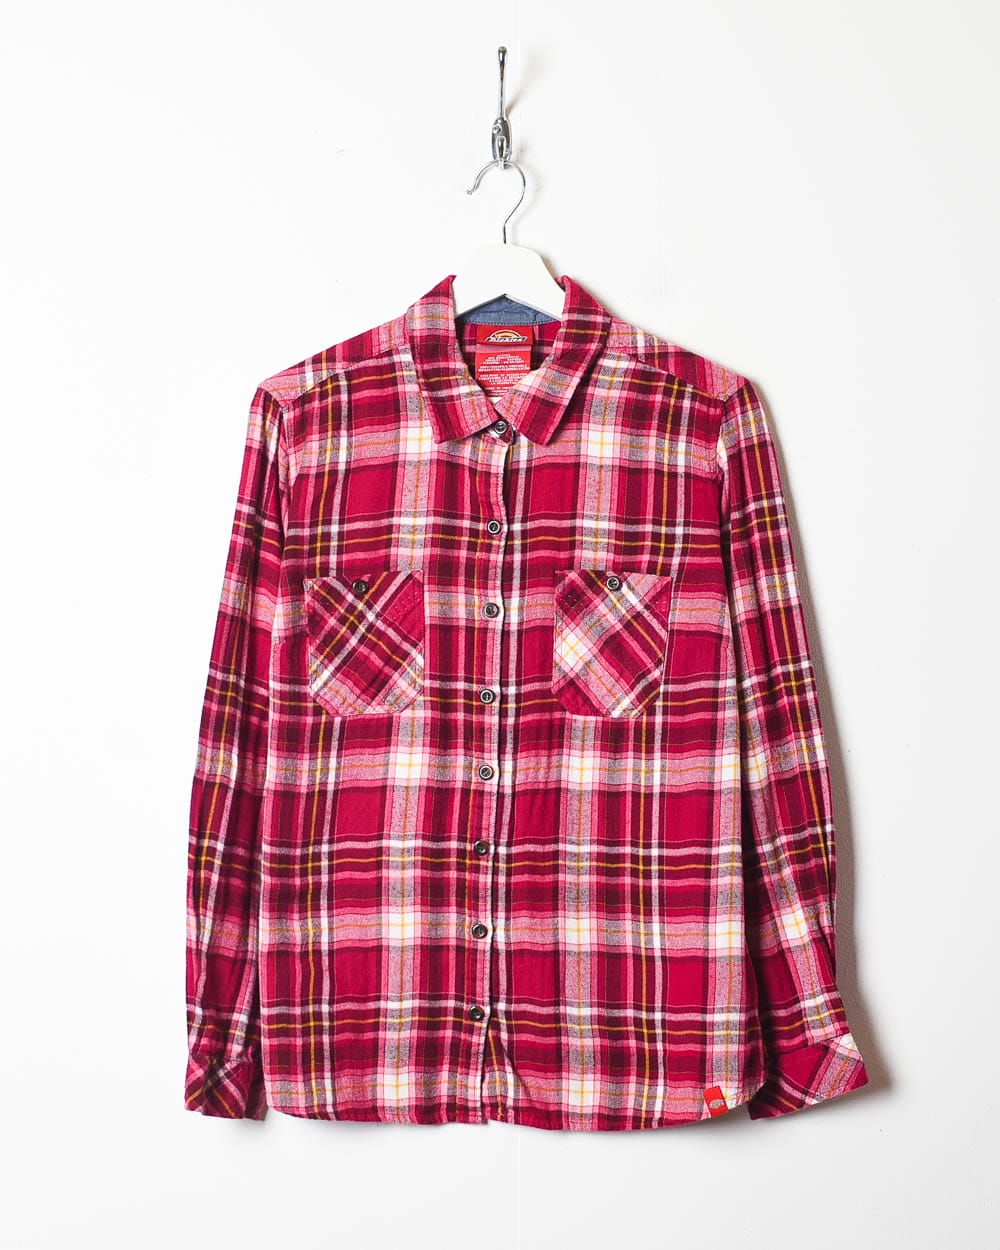 Pink Dickies Flannel Shirt - Large Women's